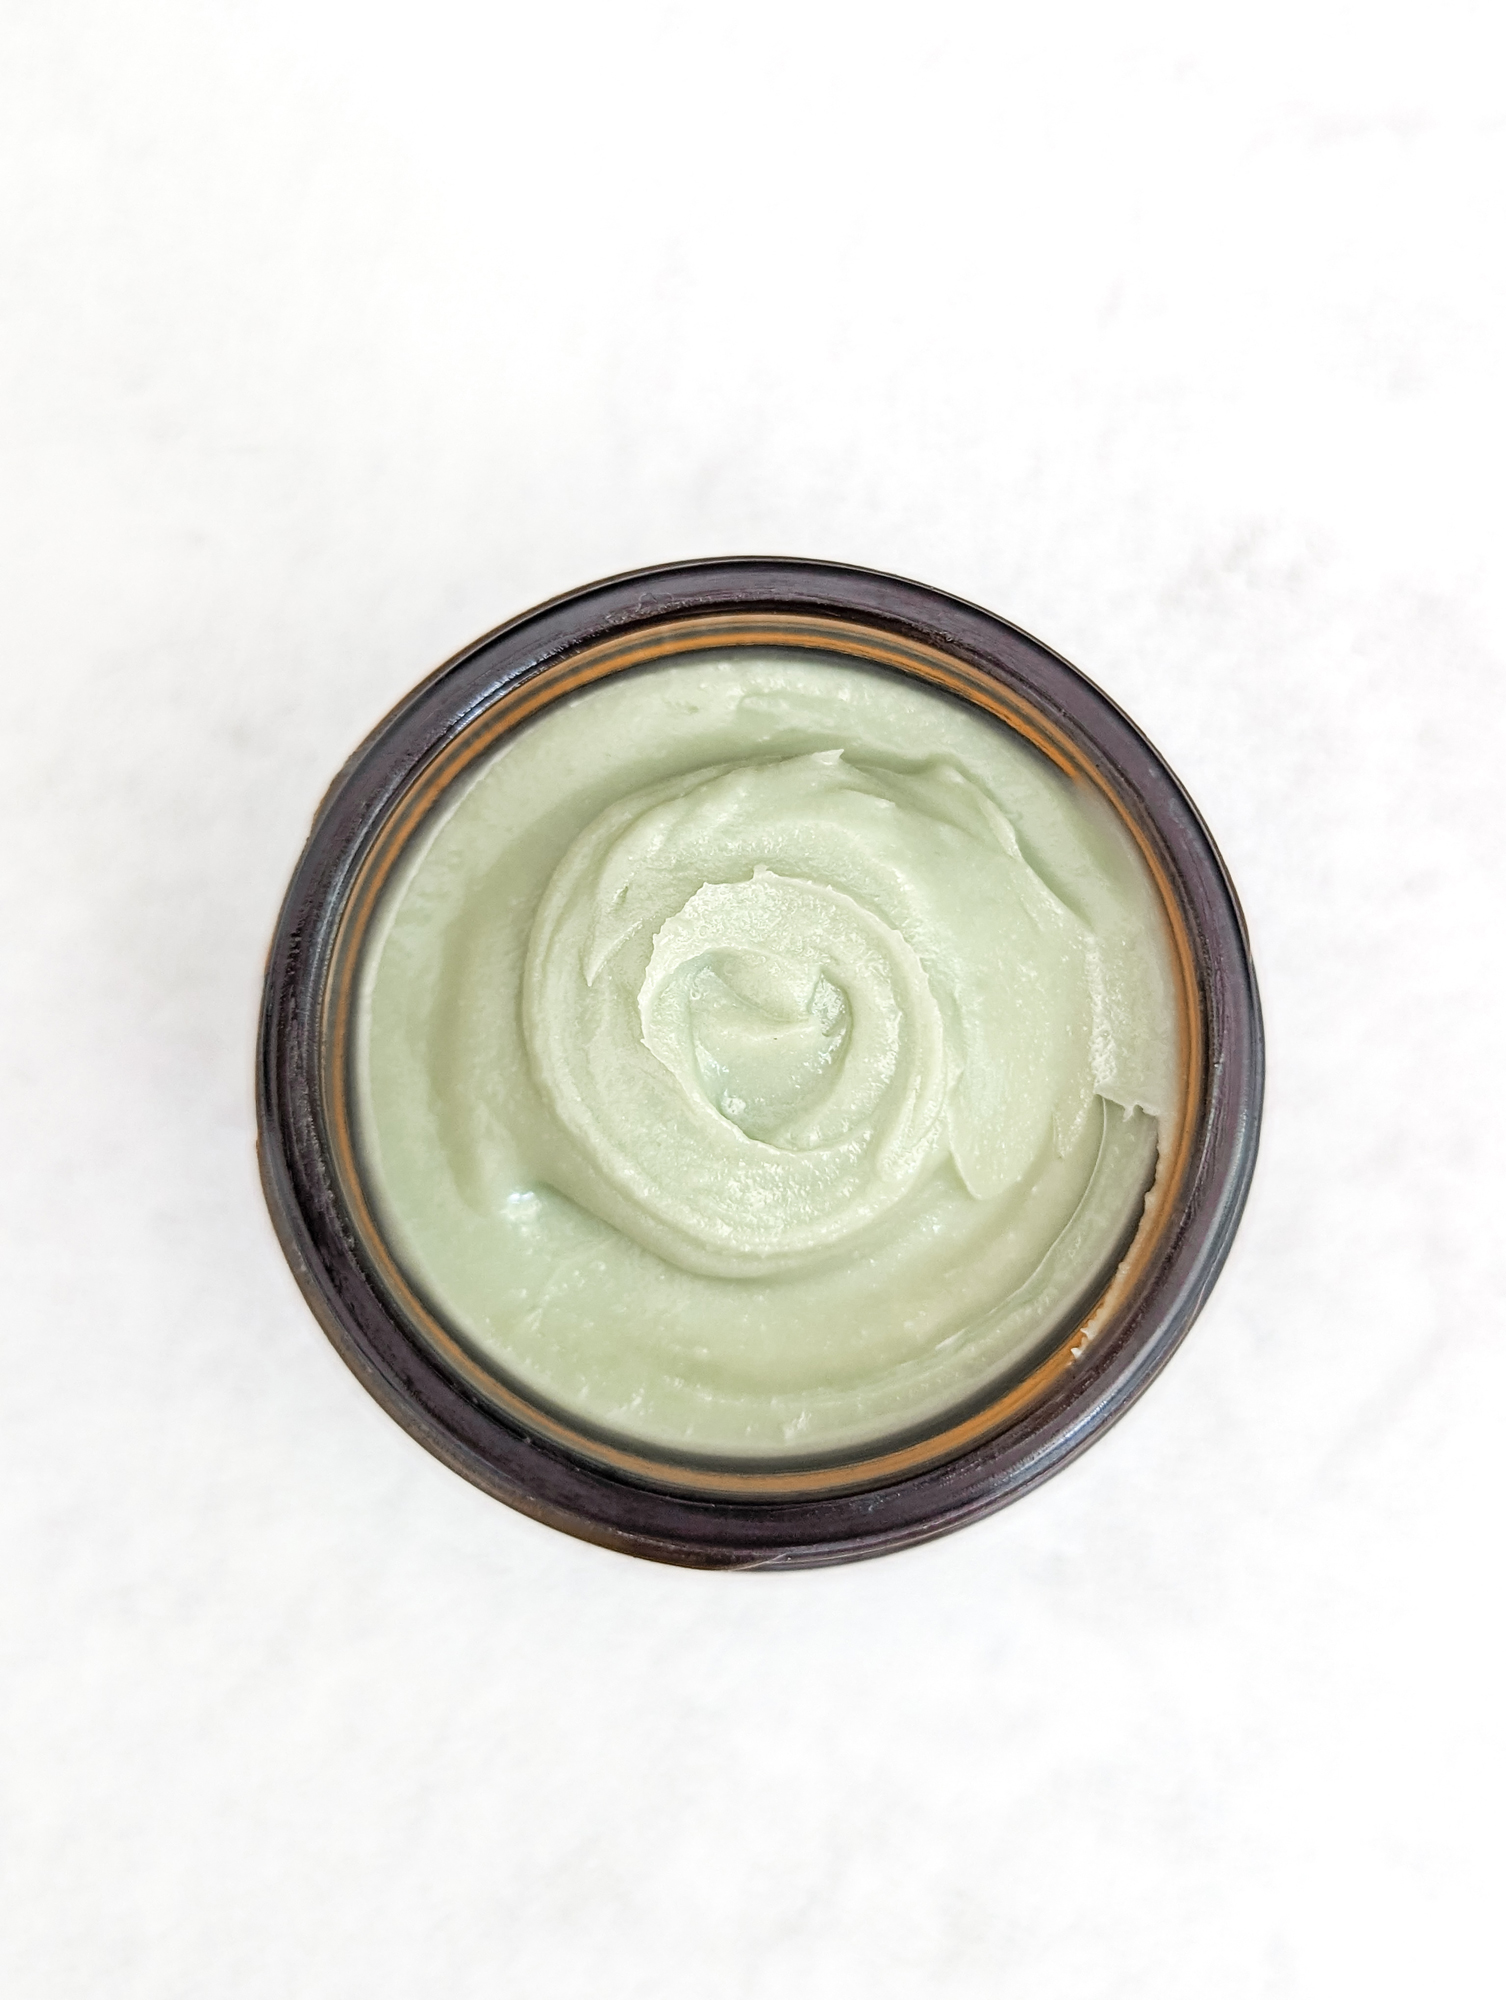 Indiefog Soothe Facial Butter